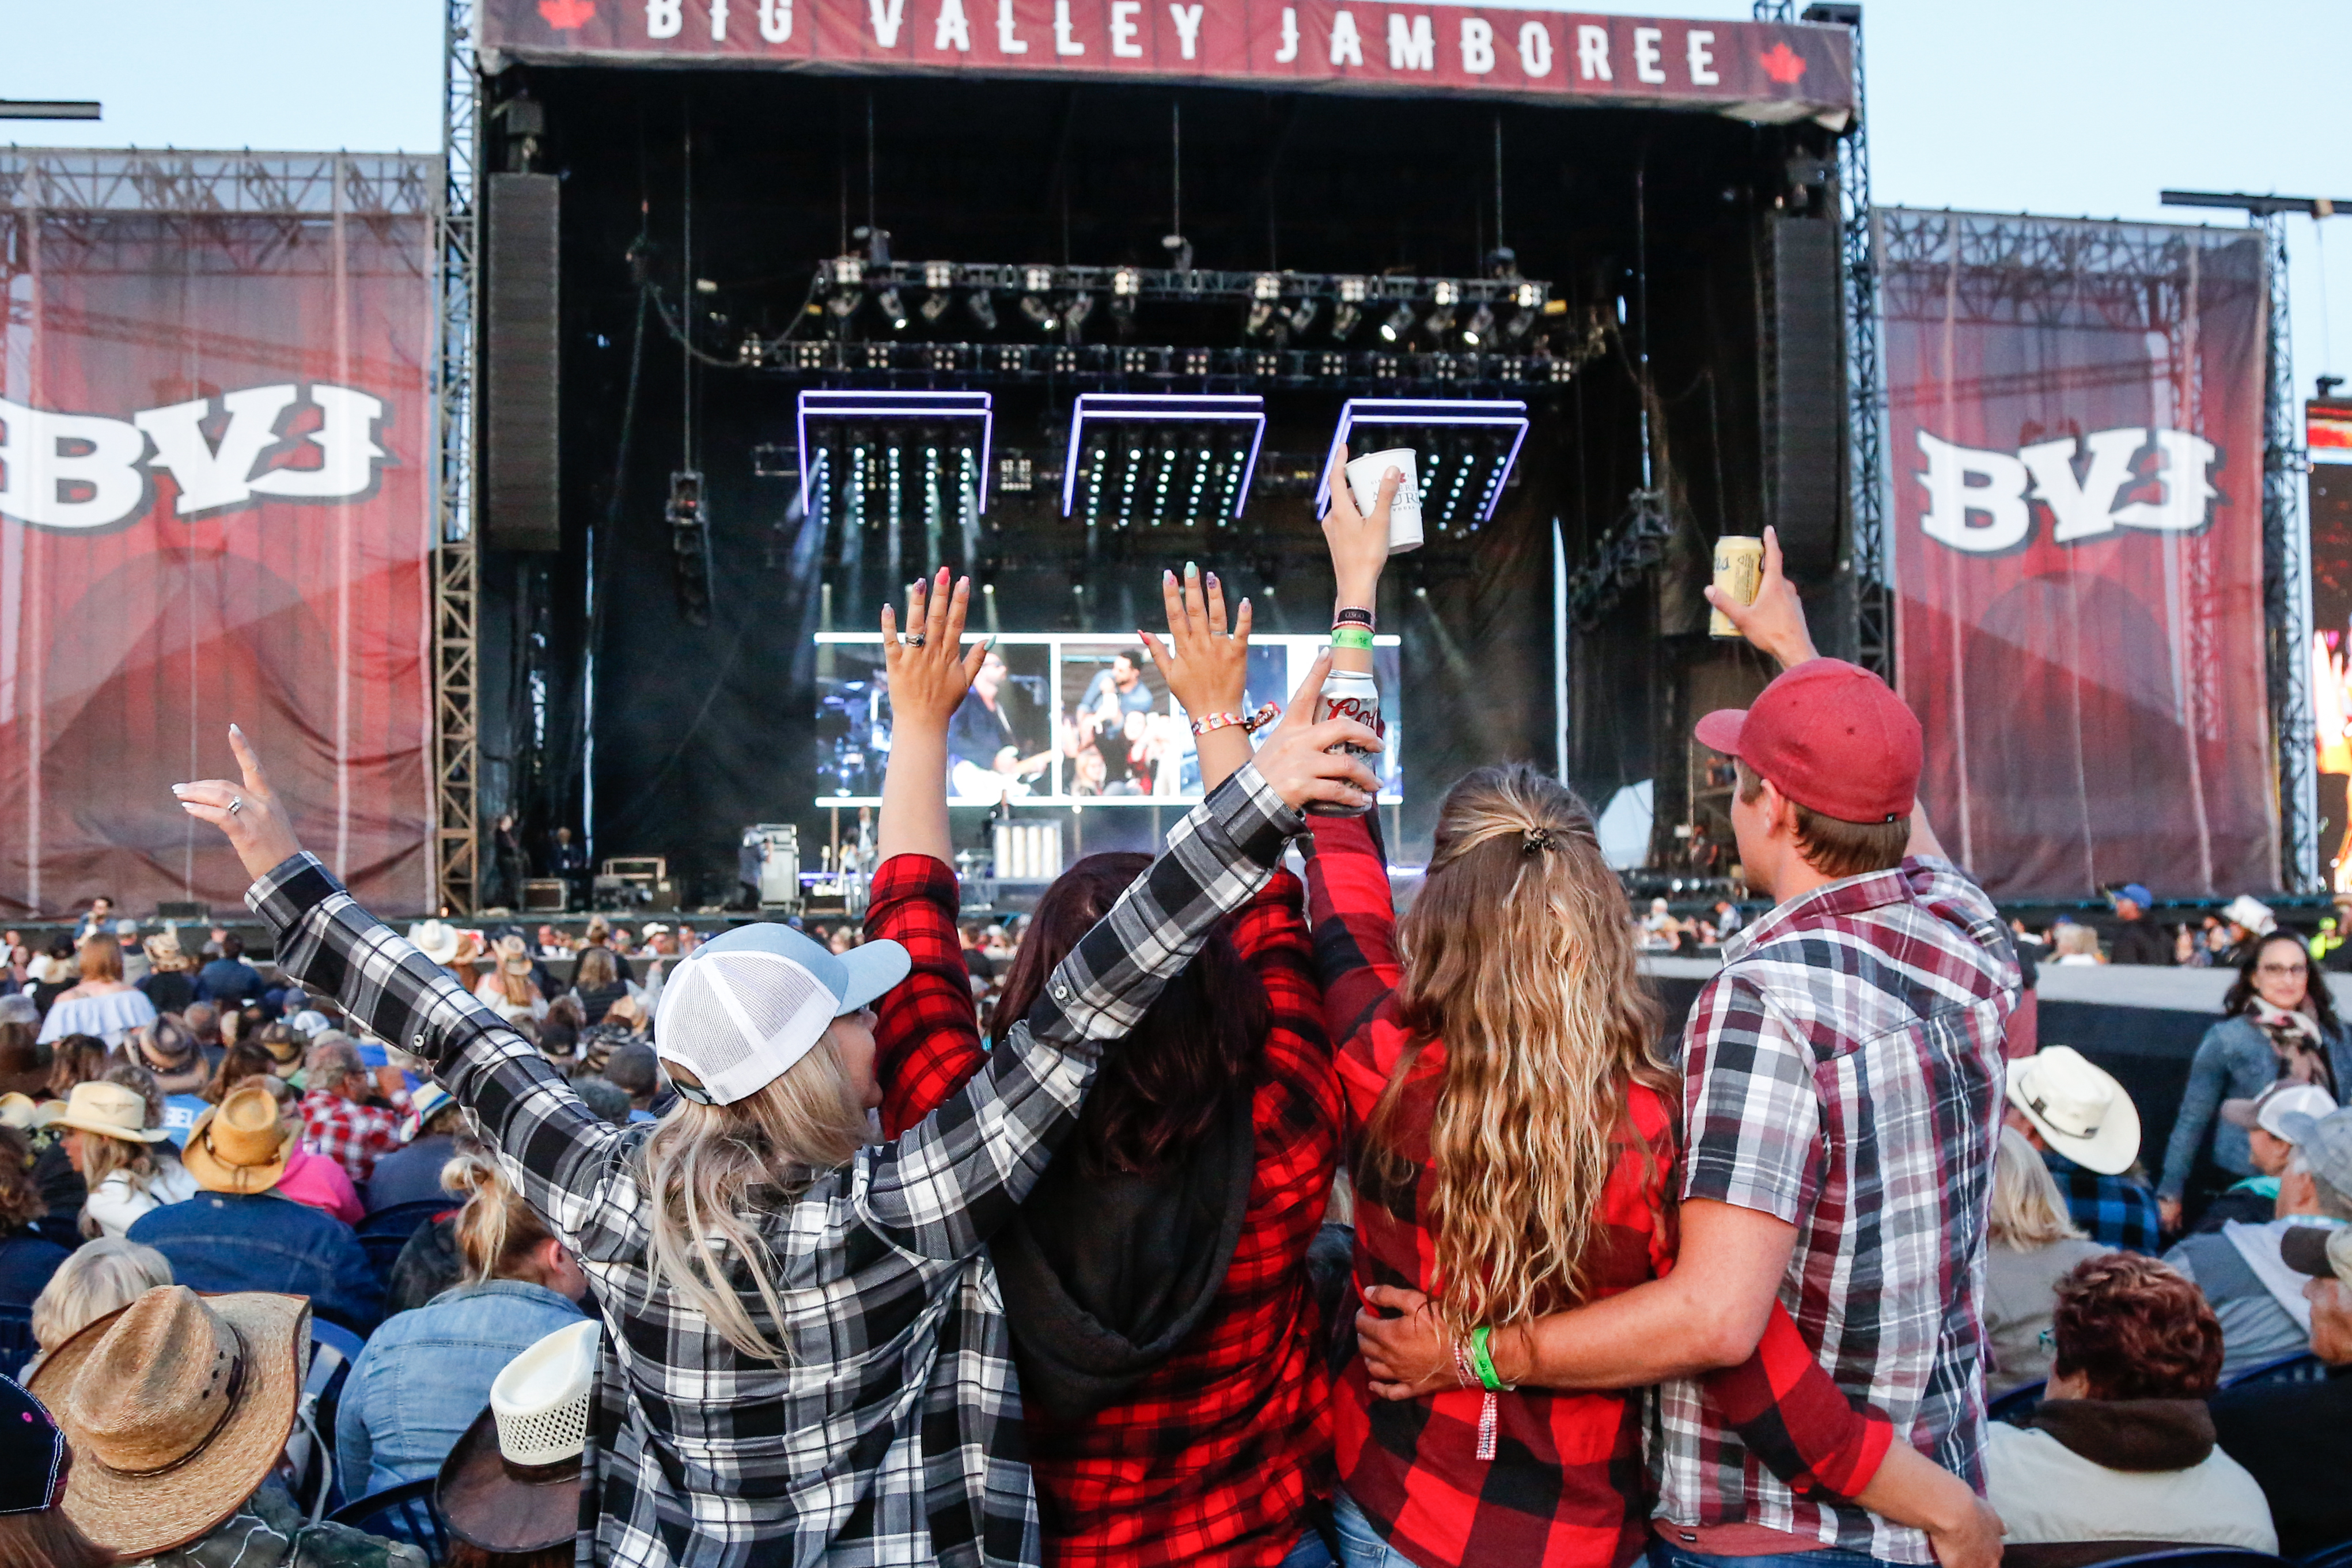 A raucous crowd cheers a stage at an outdoor music festival.